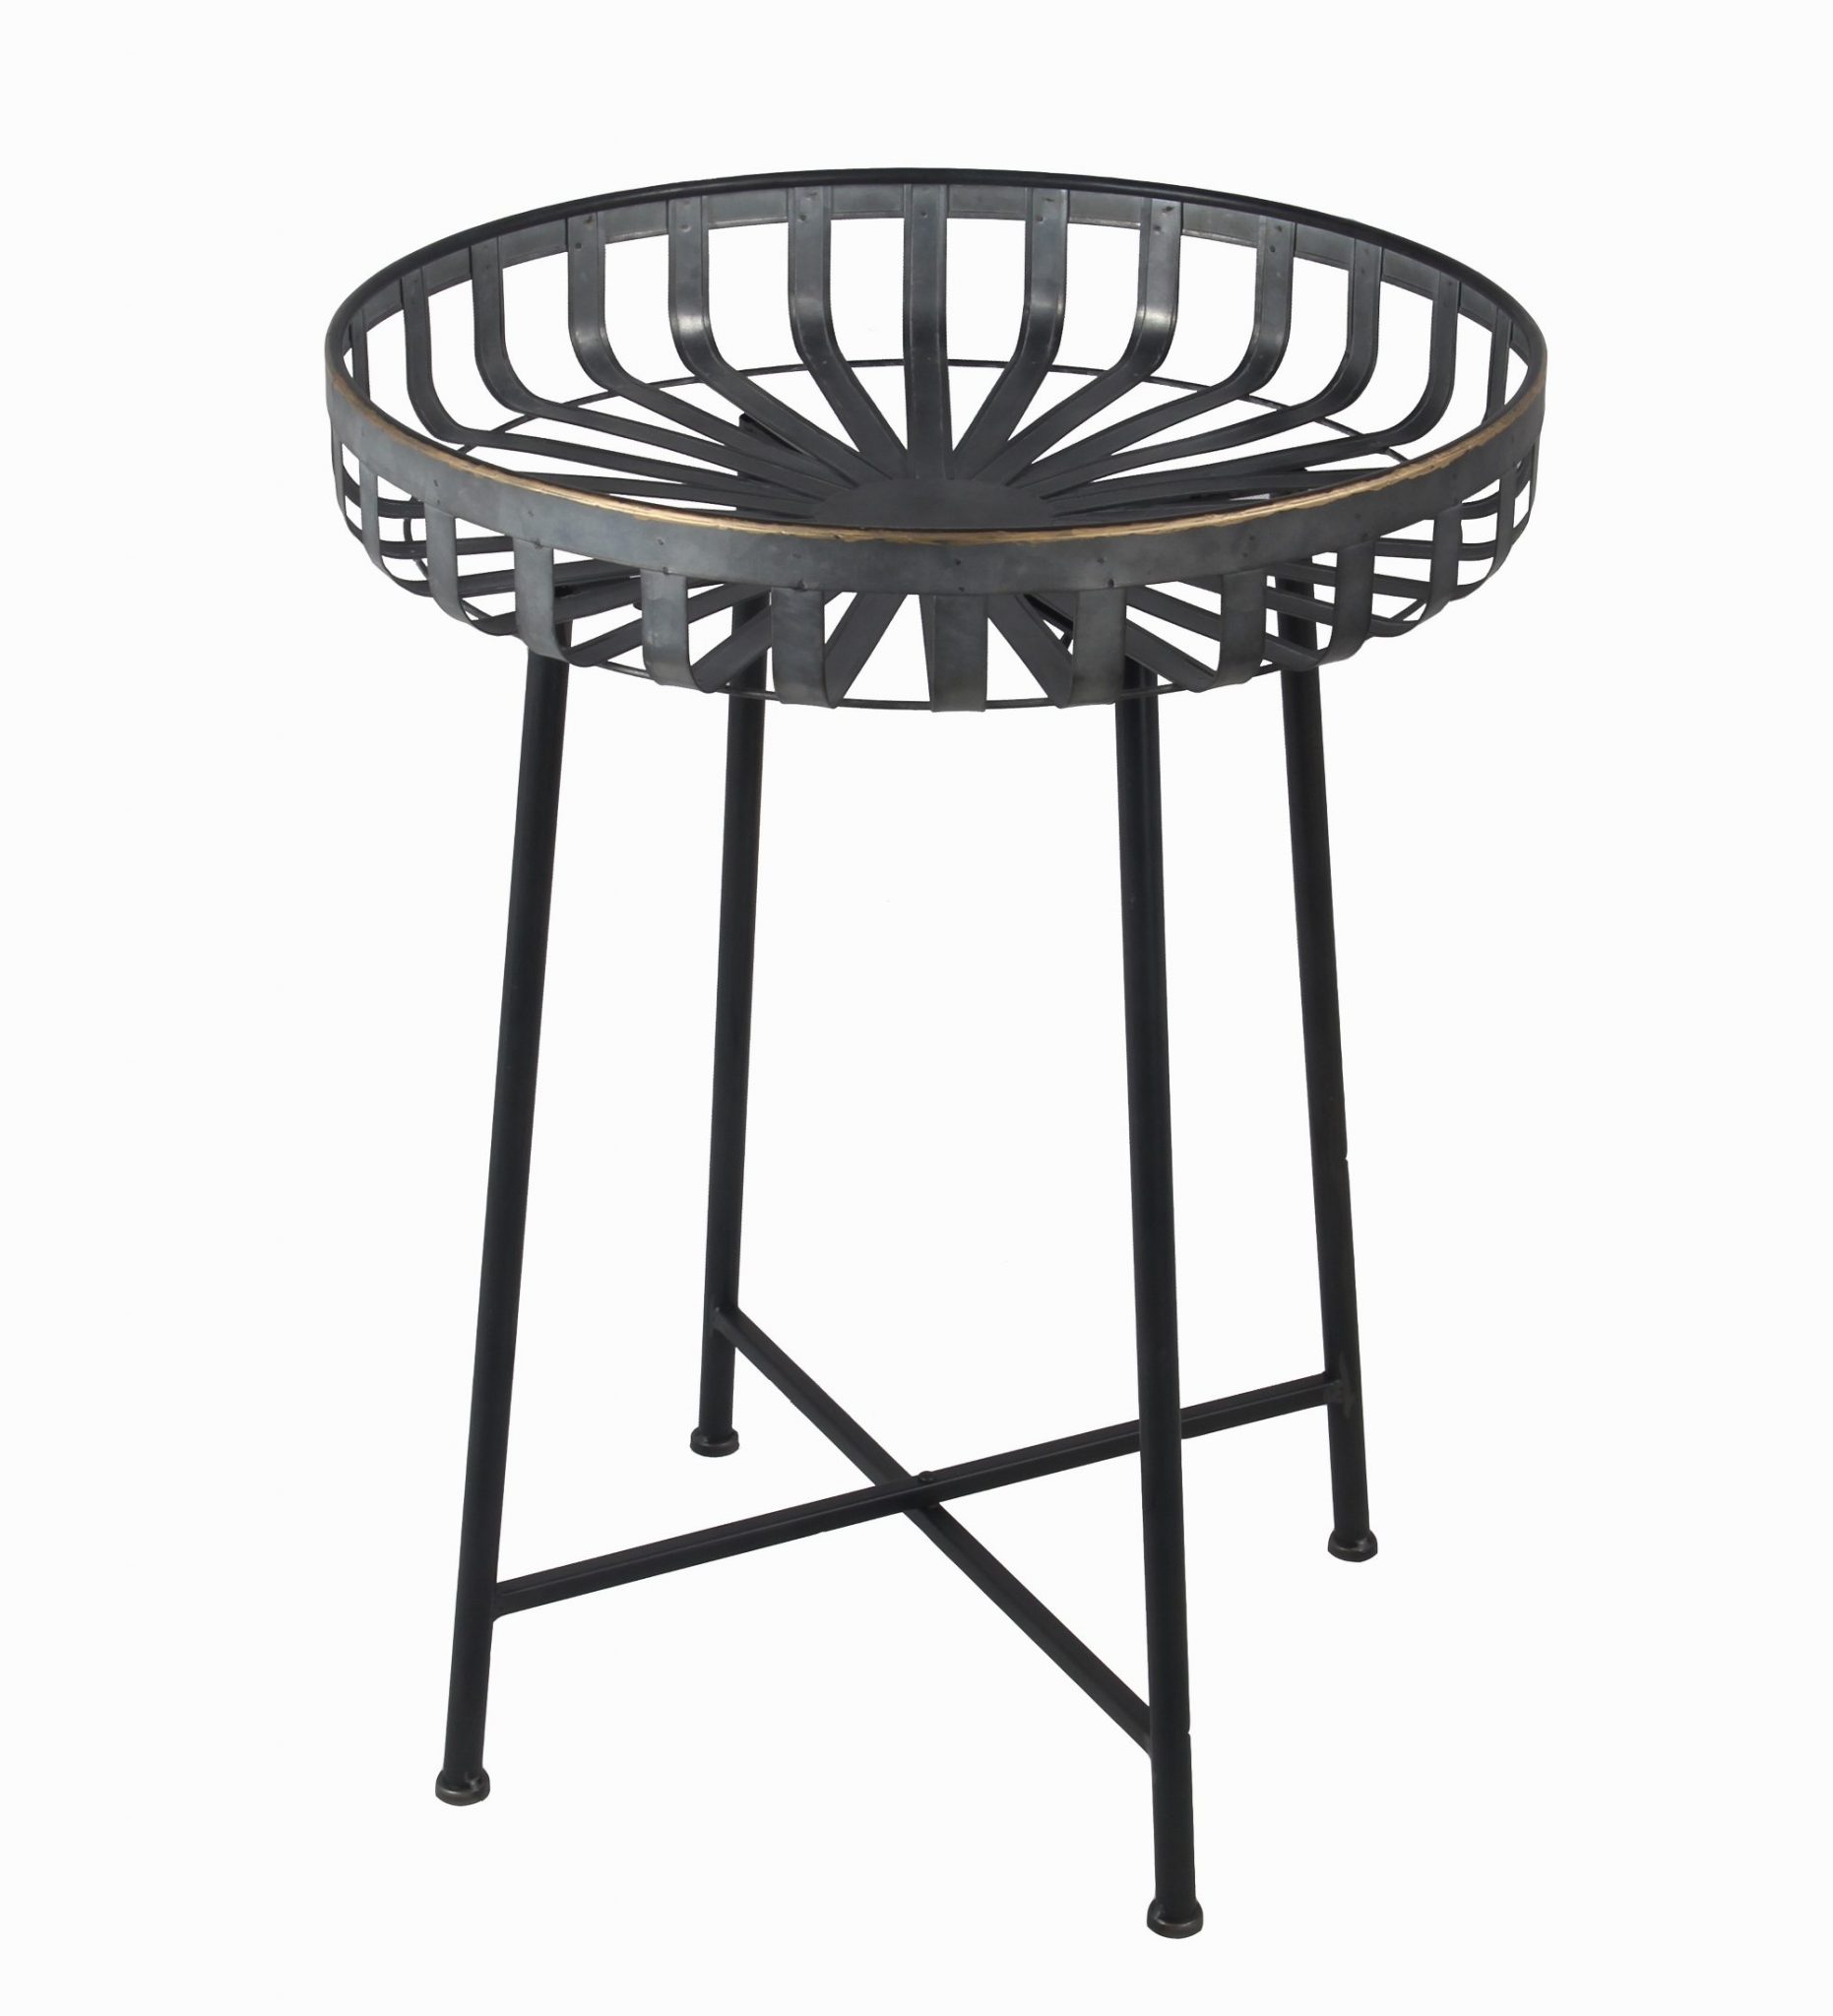 iron round accent table galvinized color with finish black imitation furniture chair covers for outdoor high top patio umbrella pads target ethan allen bar height coffee metal